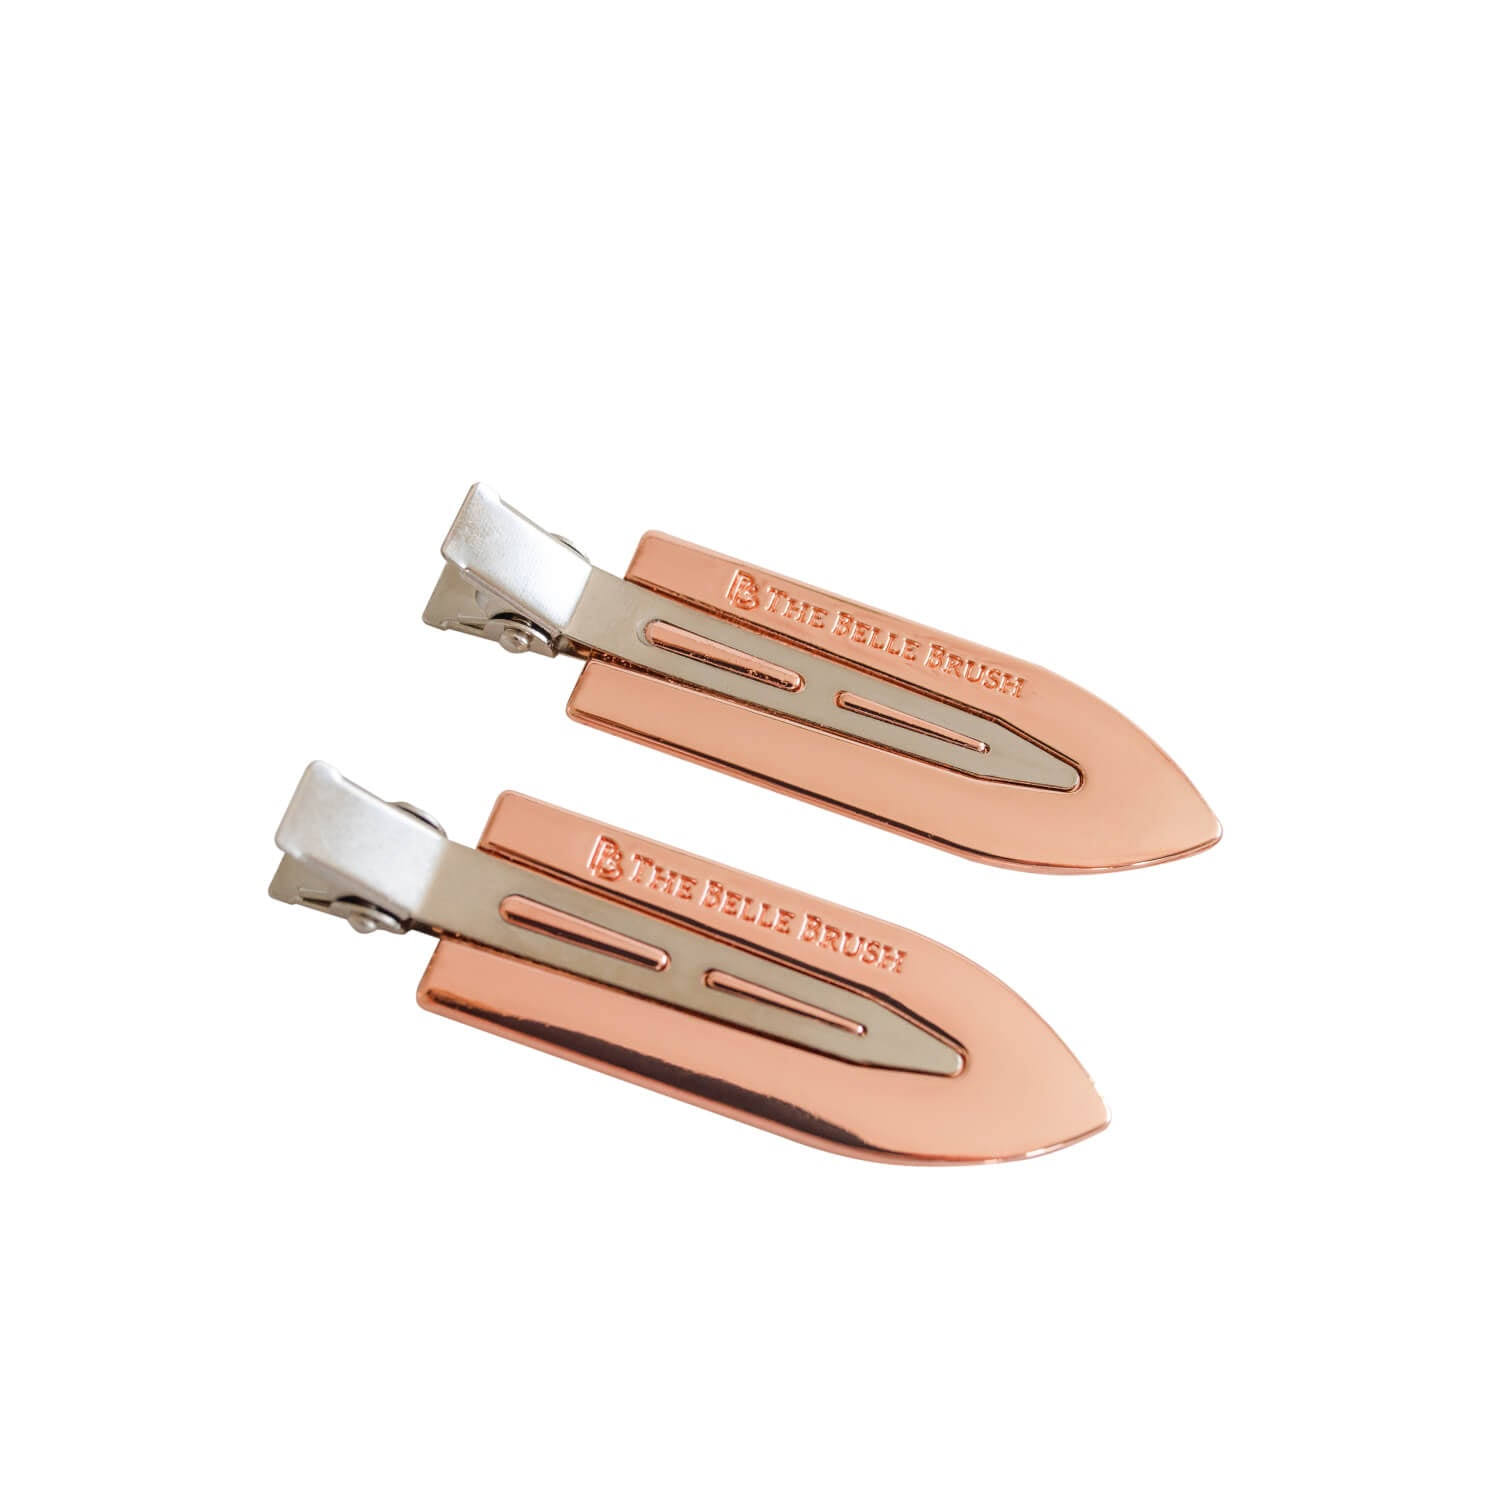 The Belle Brush Beauty Clips 2-Pack - Accessories